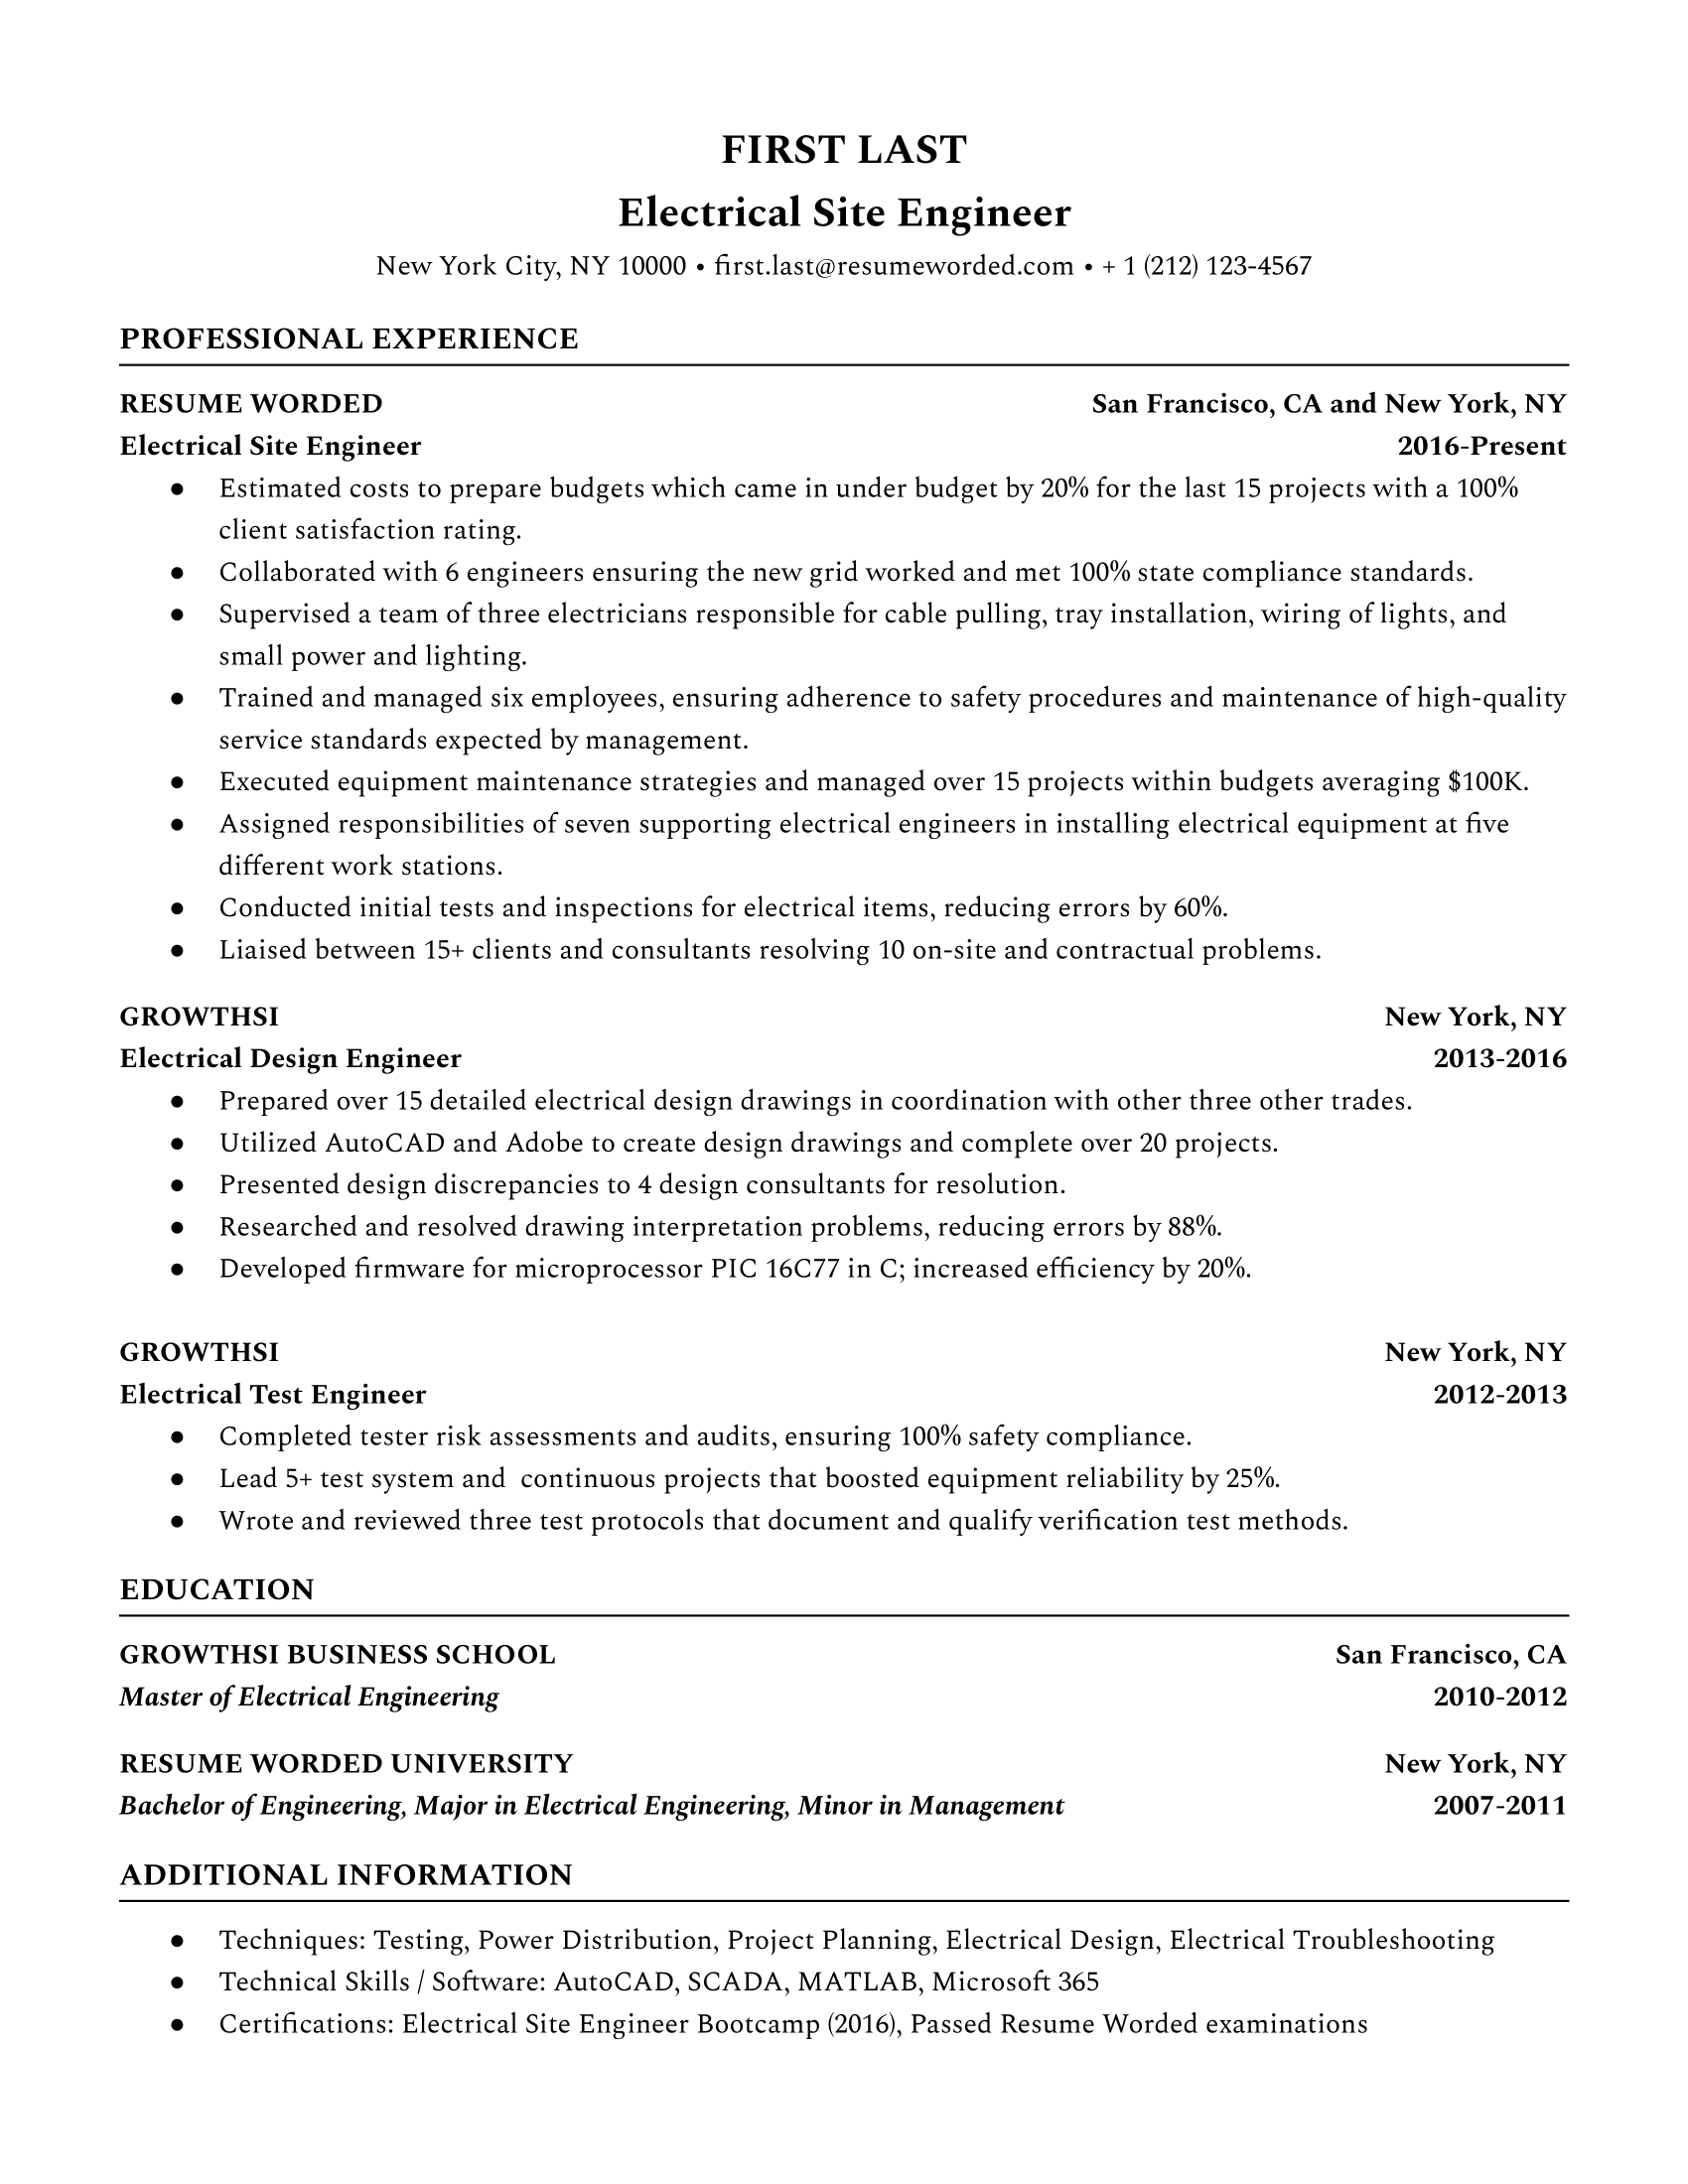 Electrical site engineer resume with relevant work experience, leadership skills, and strong action verbs